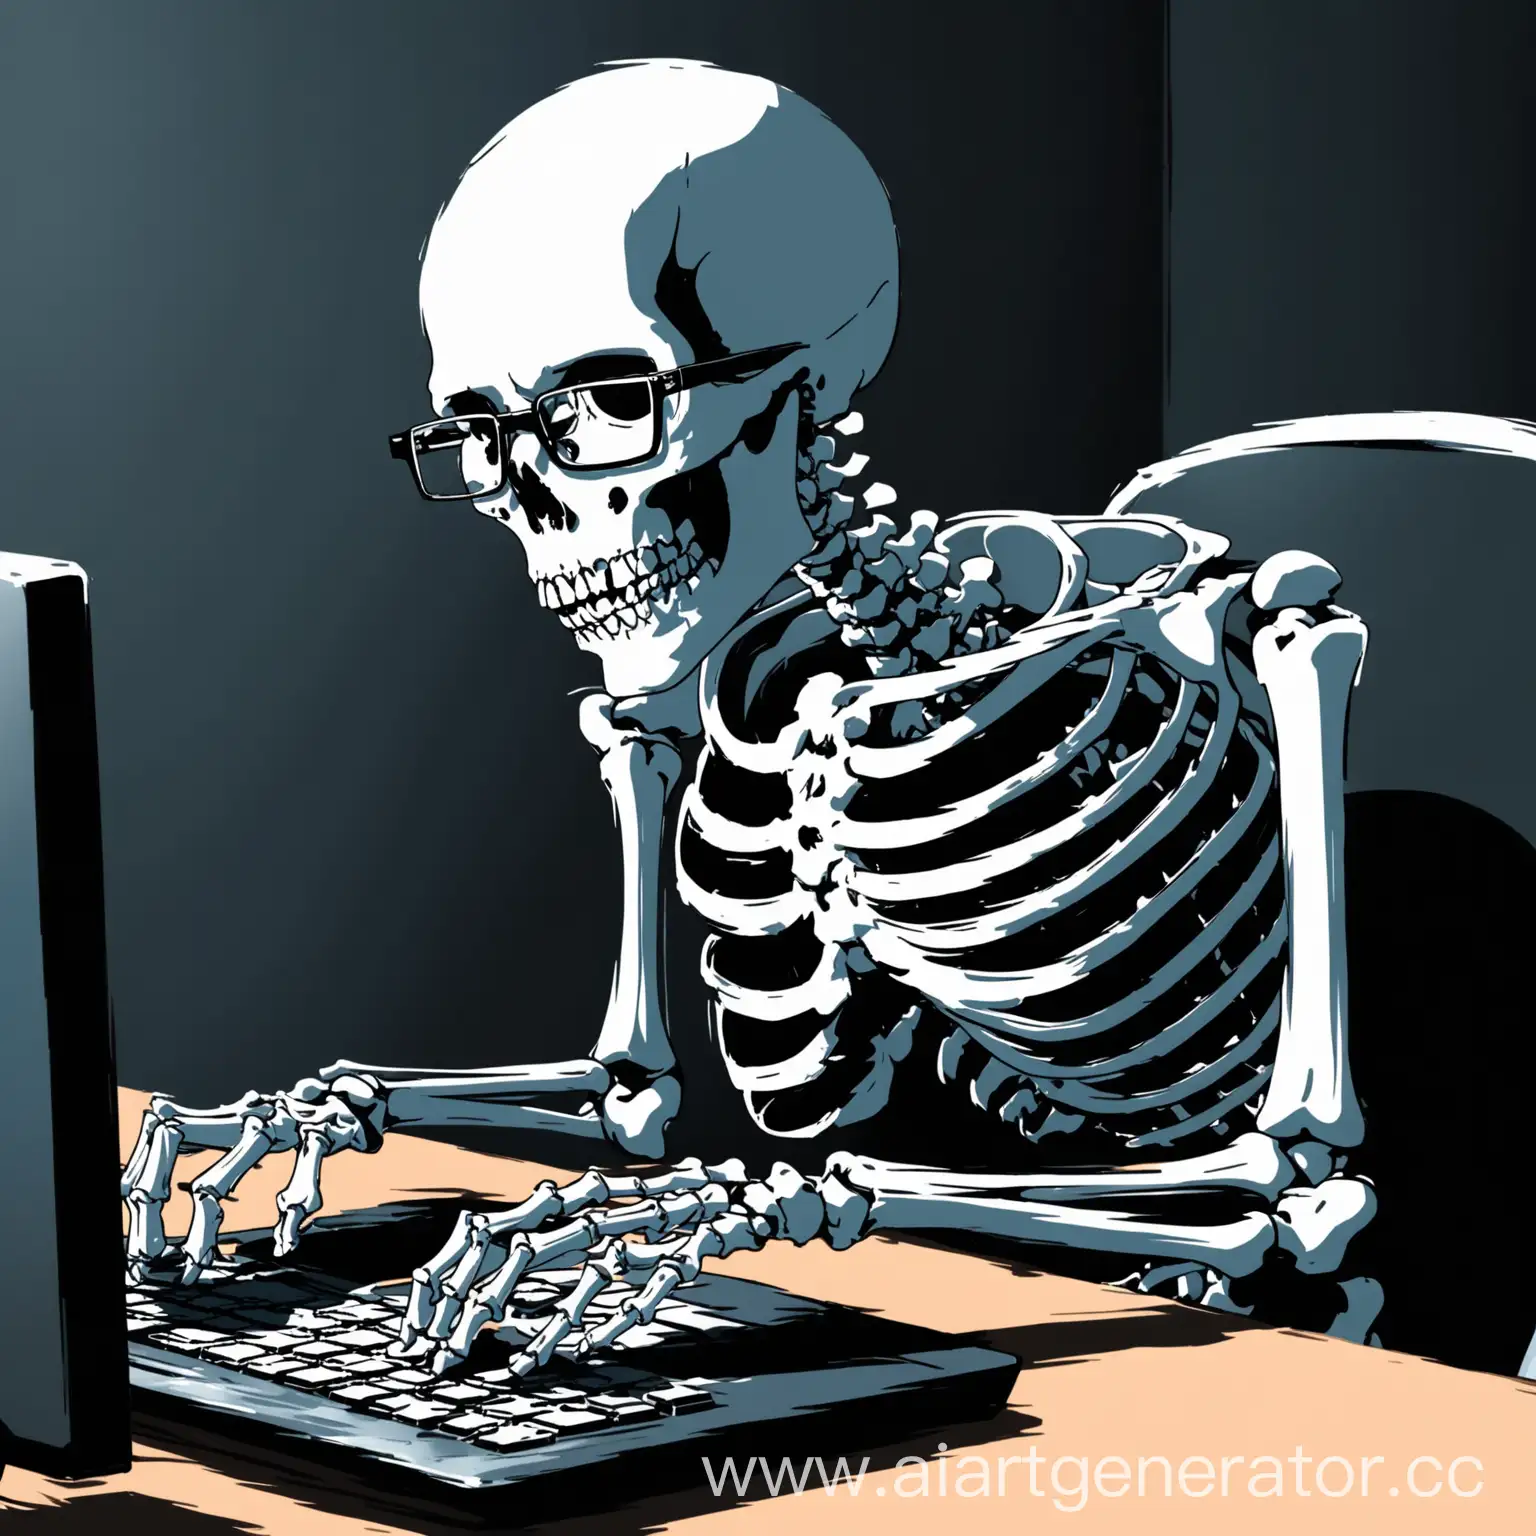 Smart-Skeleton-with-Glasses-Engaged-in-Computer-Play